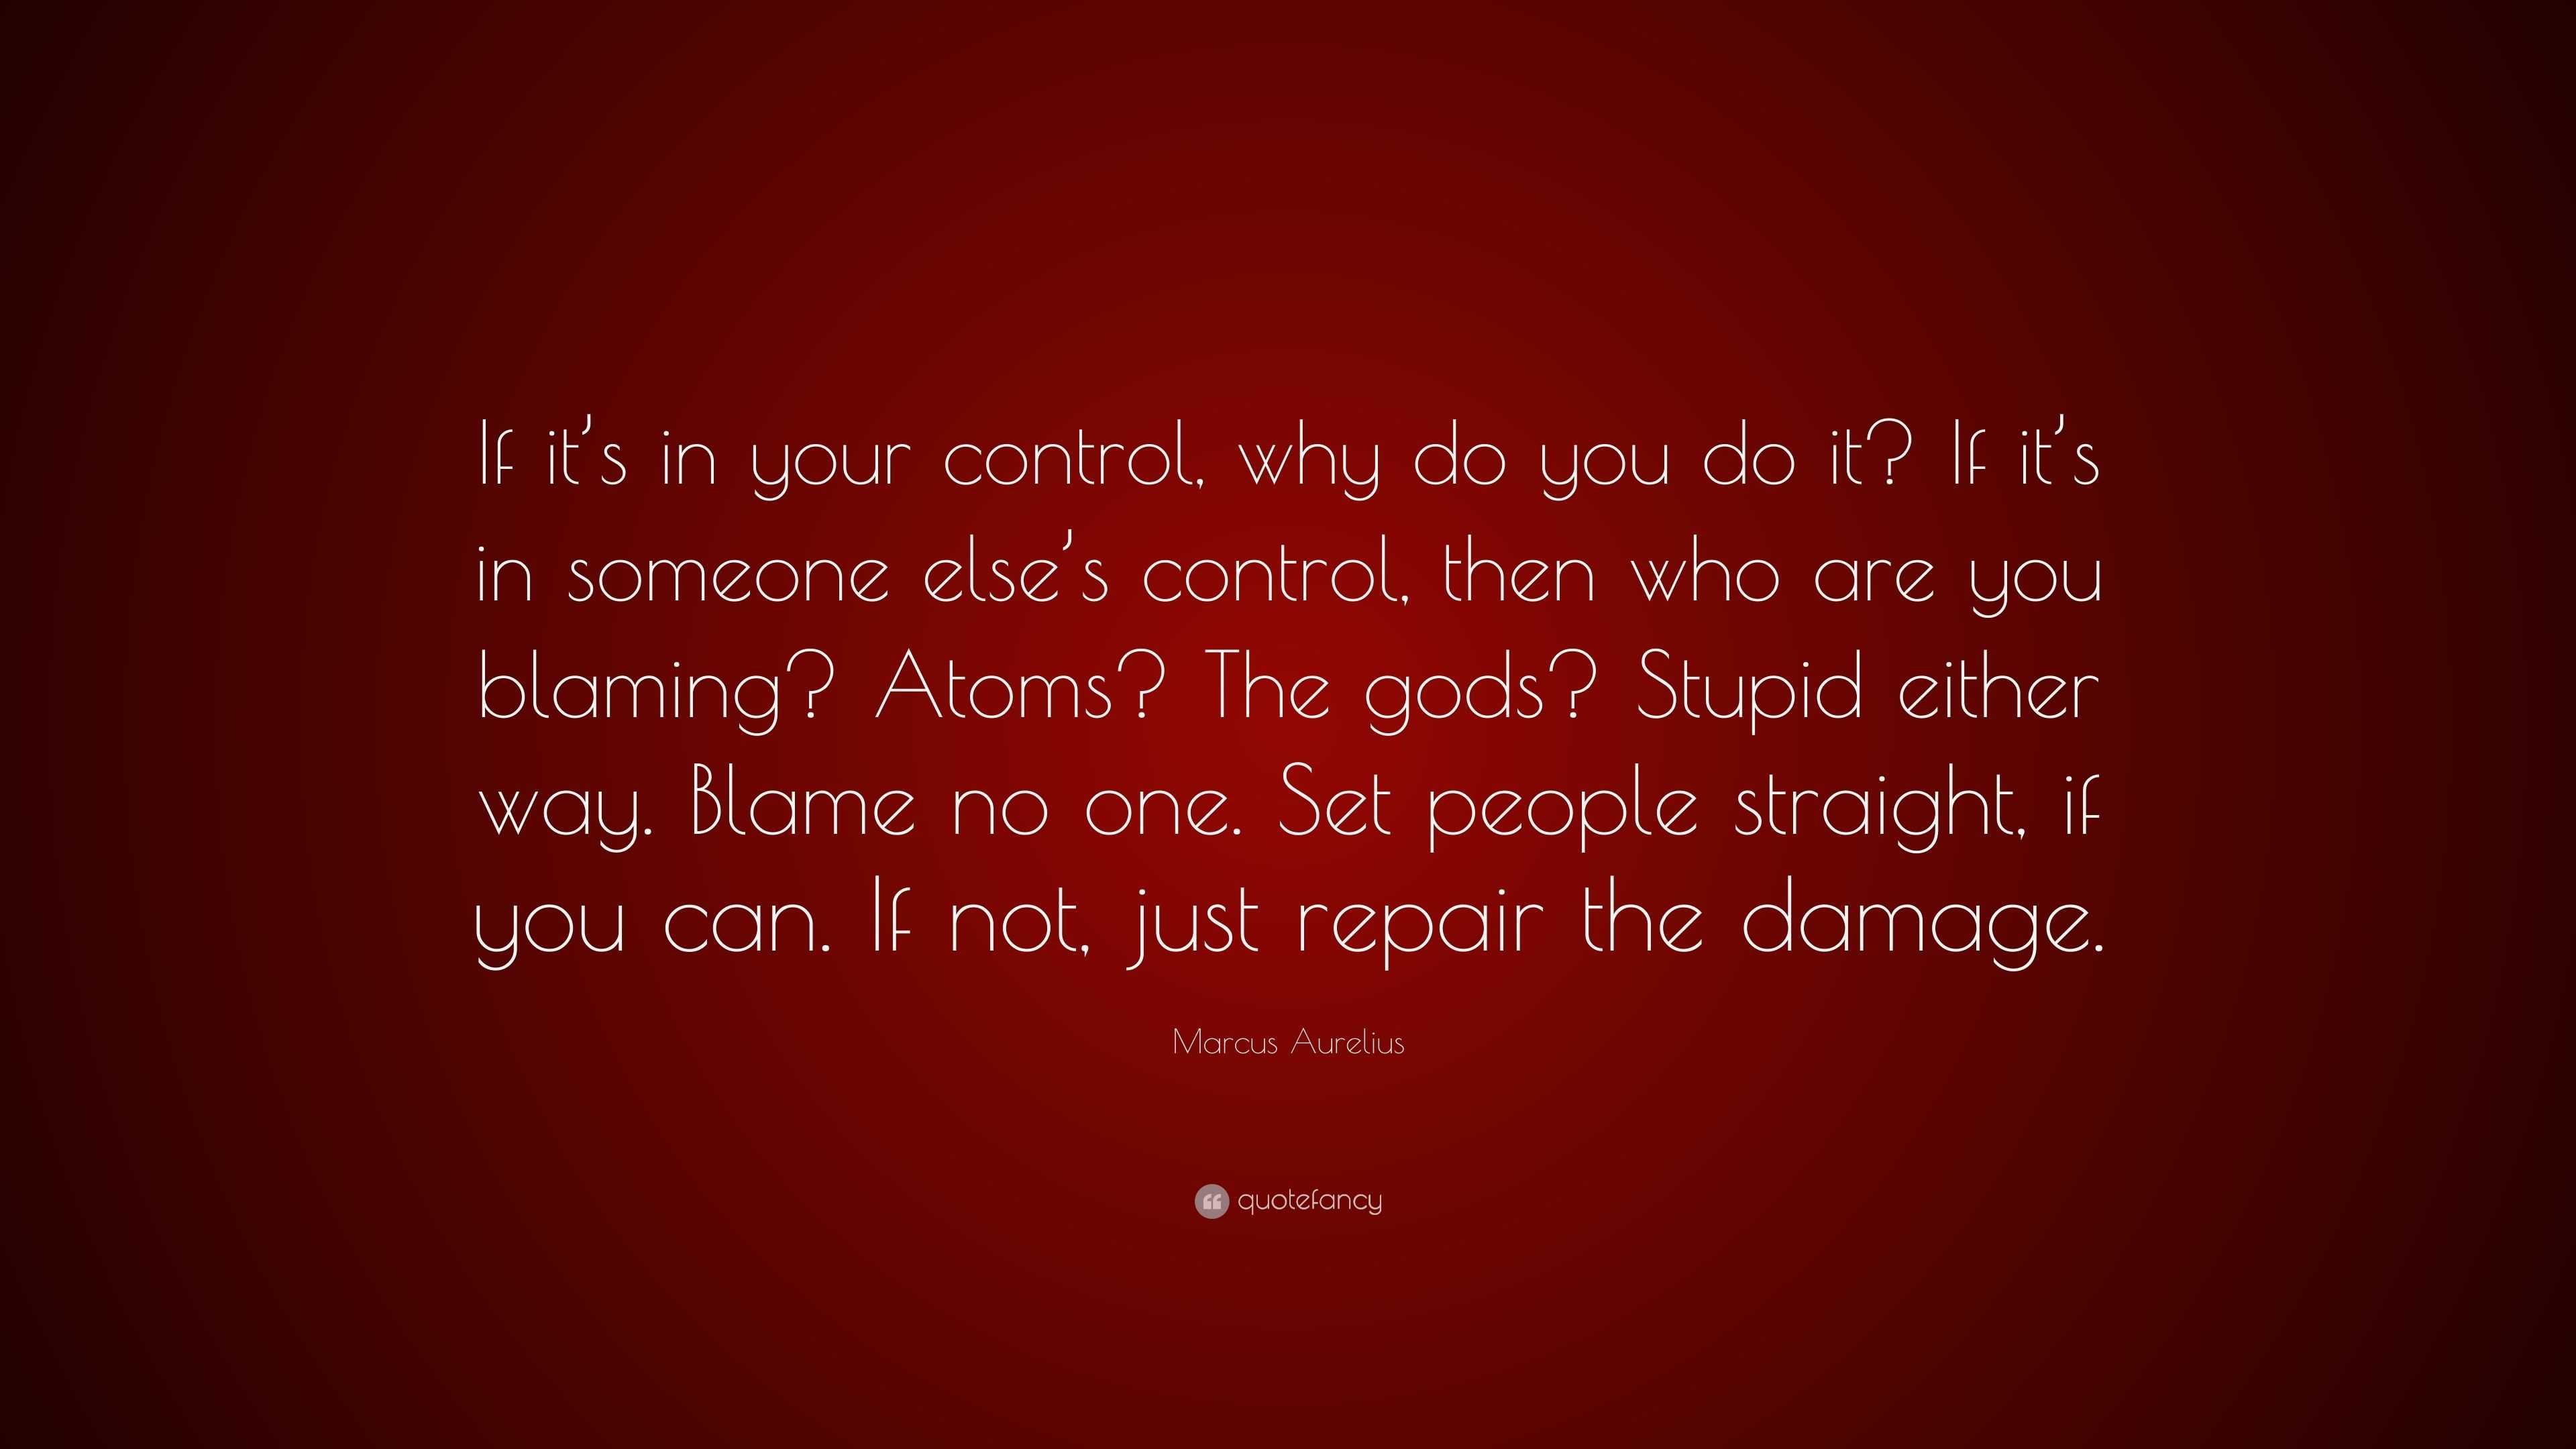 Marcus Aurelius Quote: “If it’s in your control, why do you do it? If ...